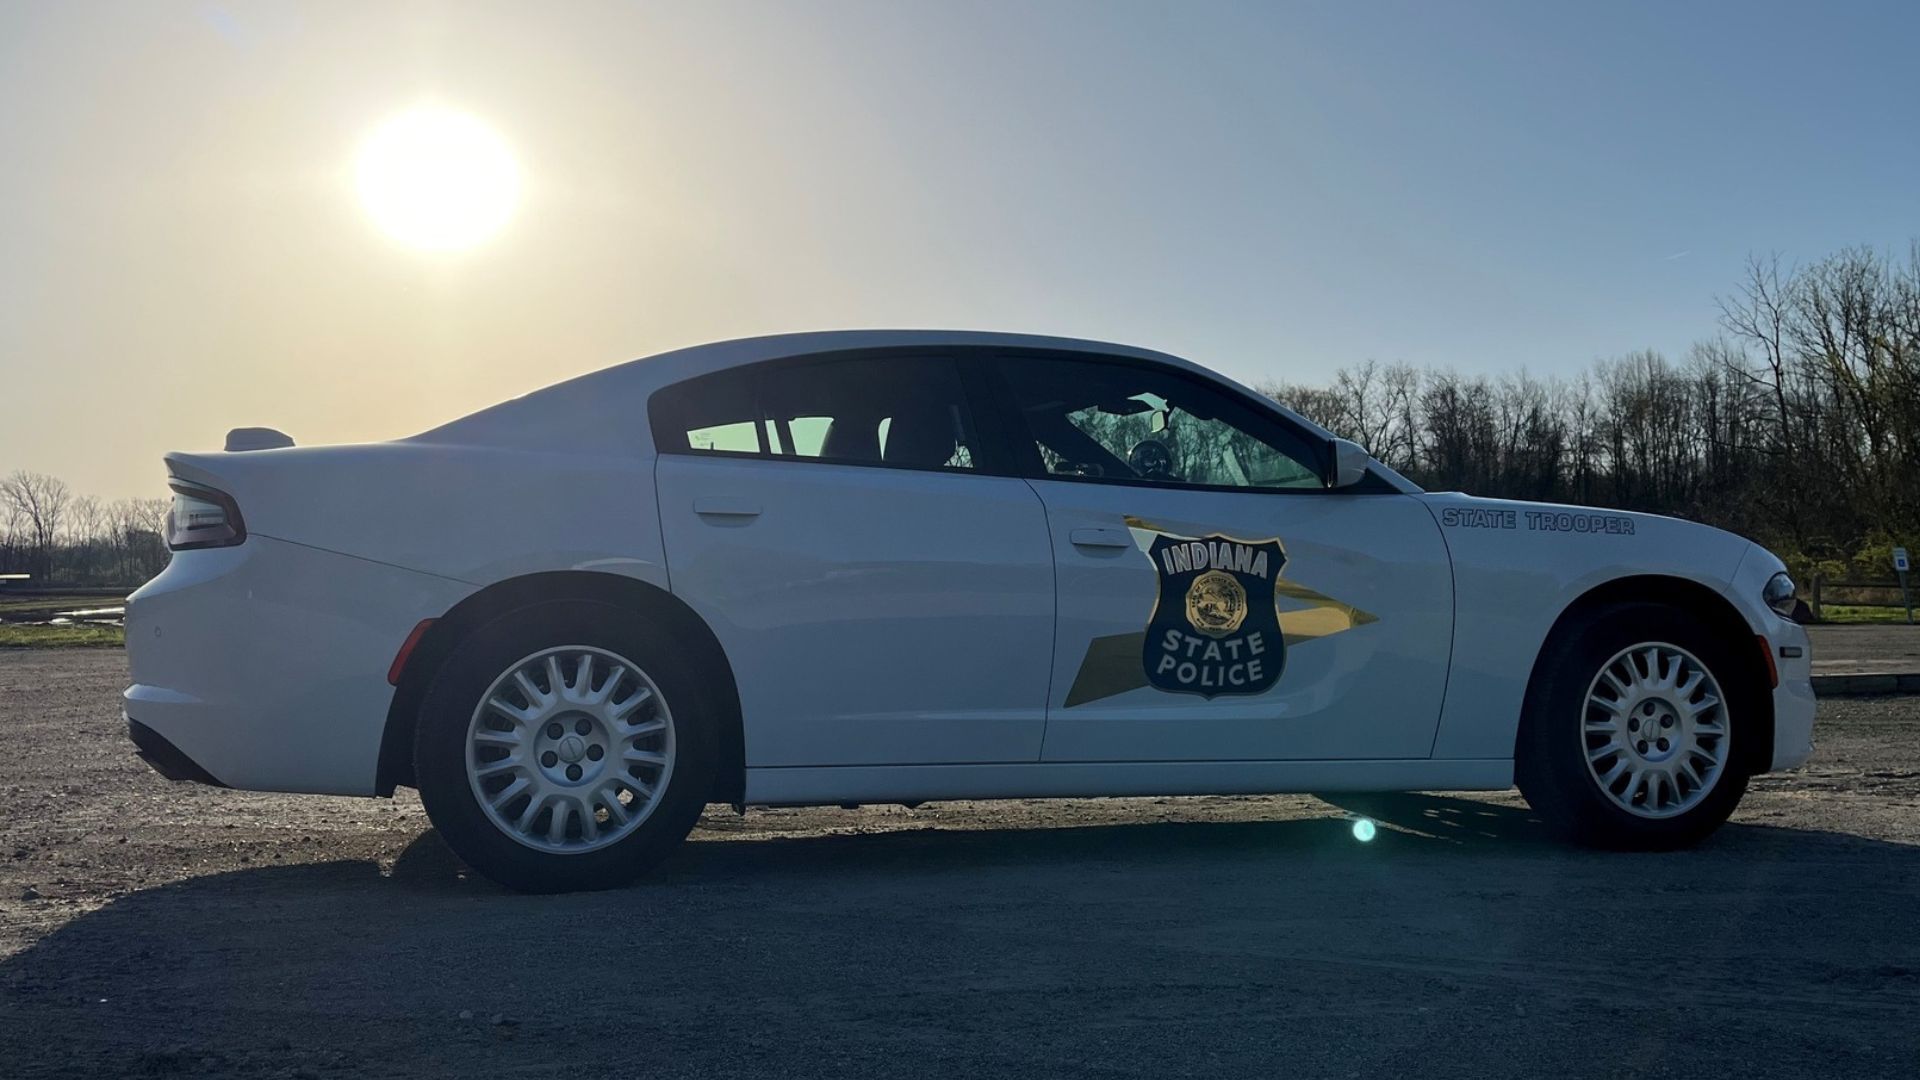 Teen In Impala Leads Indiana Trooper On 115-Plus MPH Chase